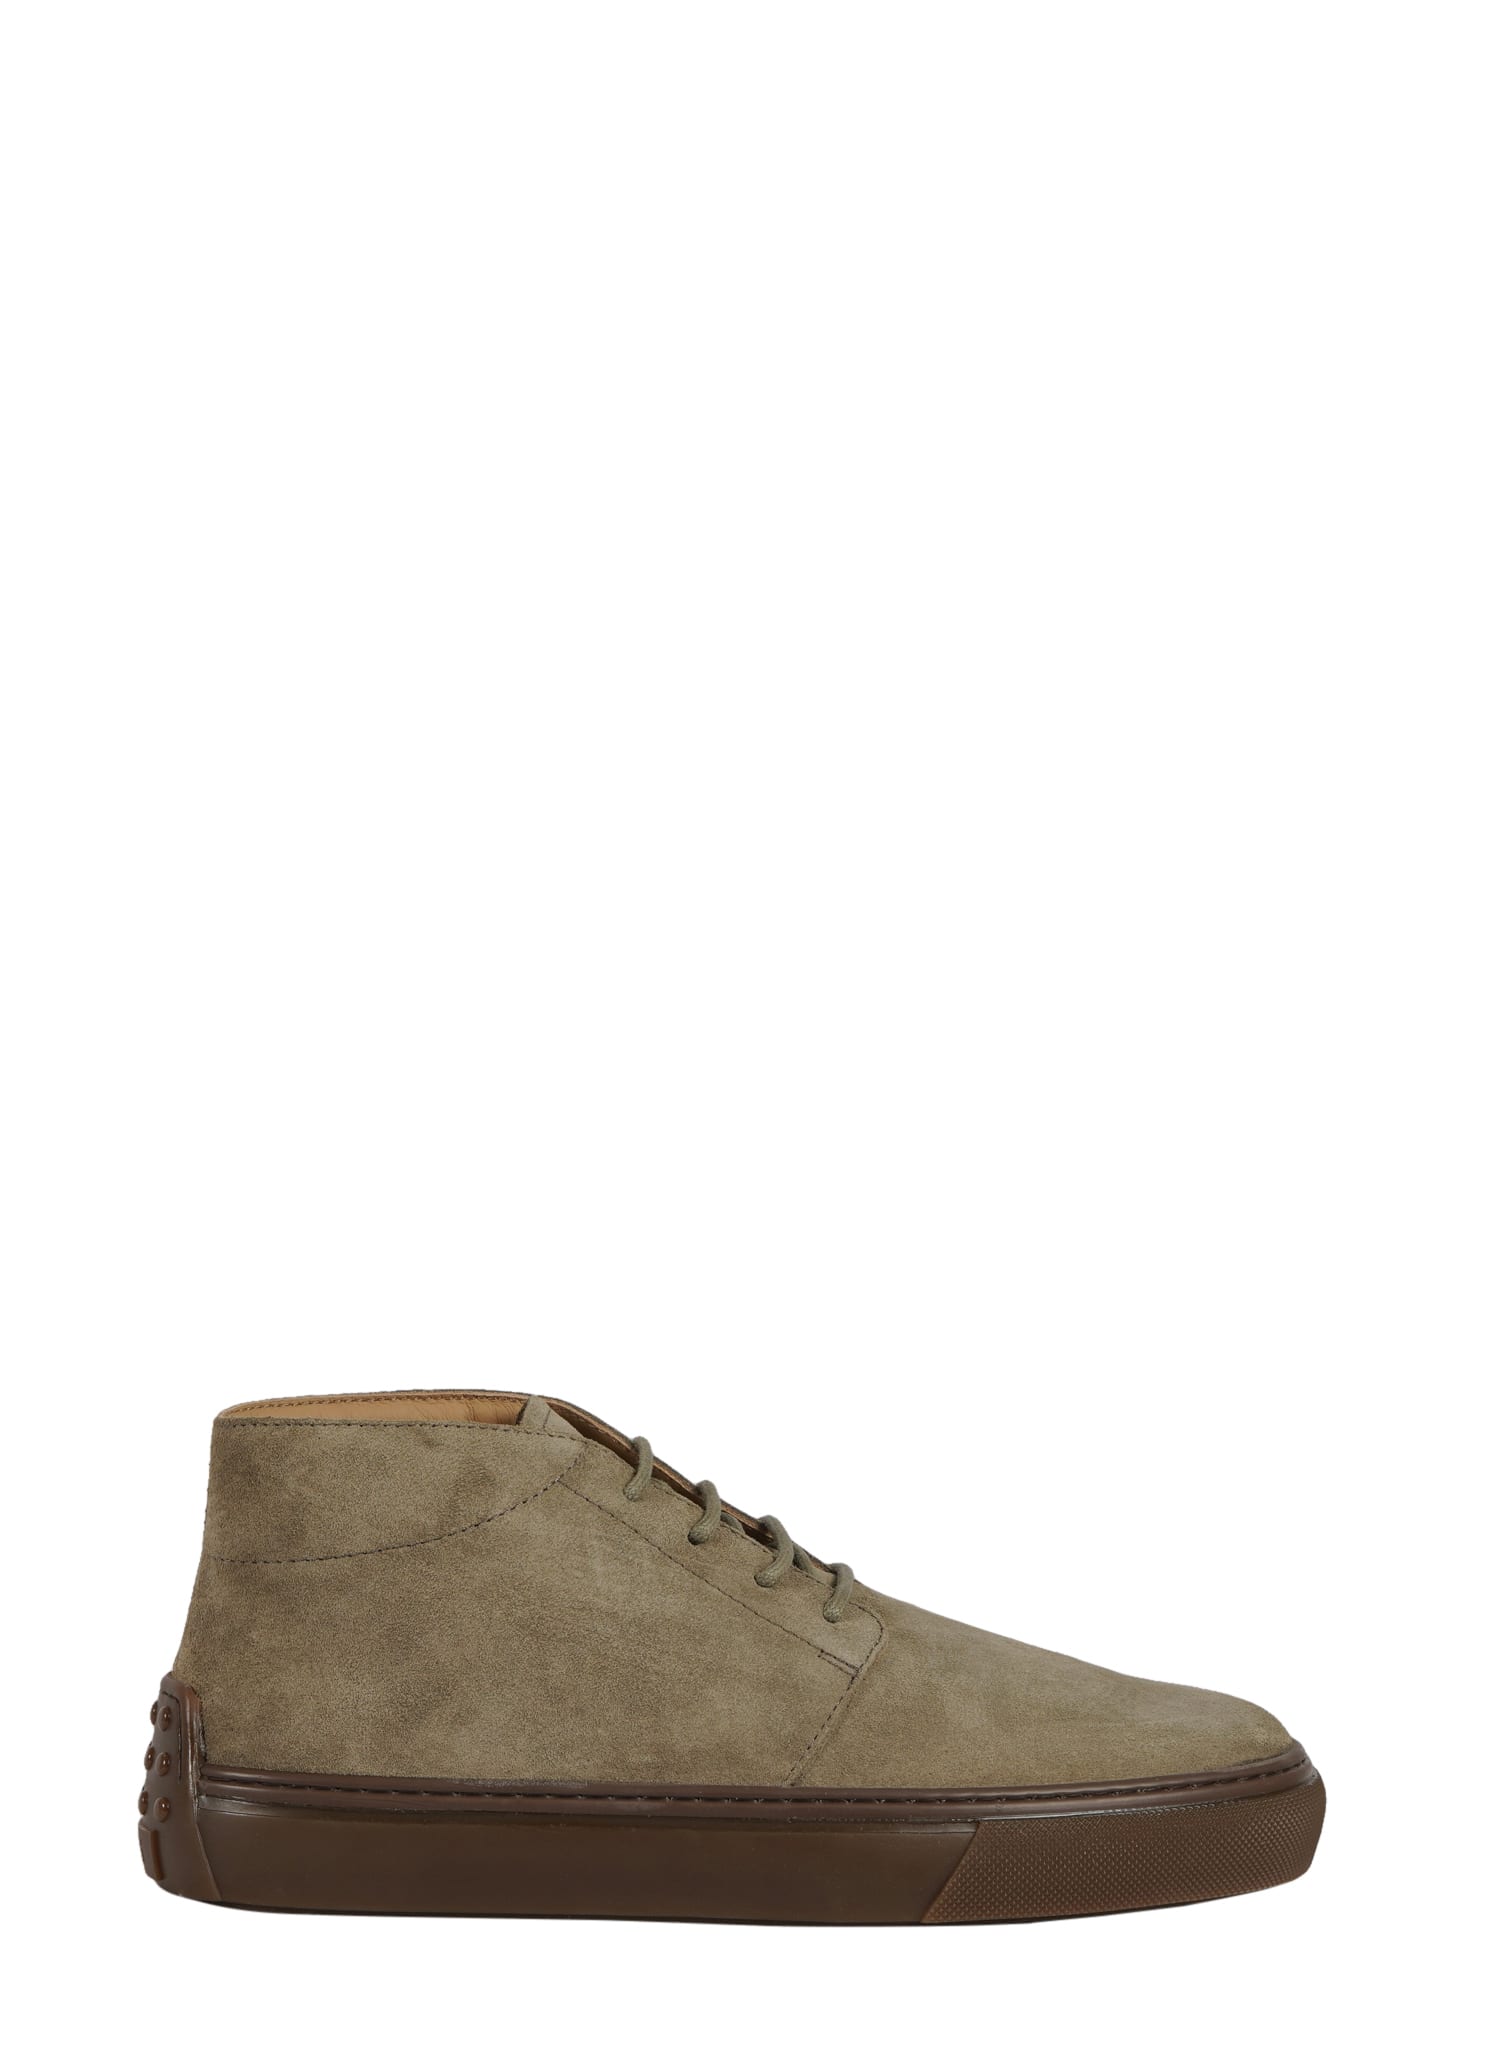 Tods Polacco Cassetta Casual Laced Shoe